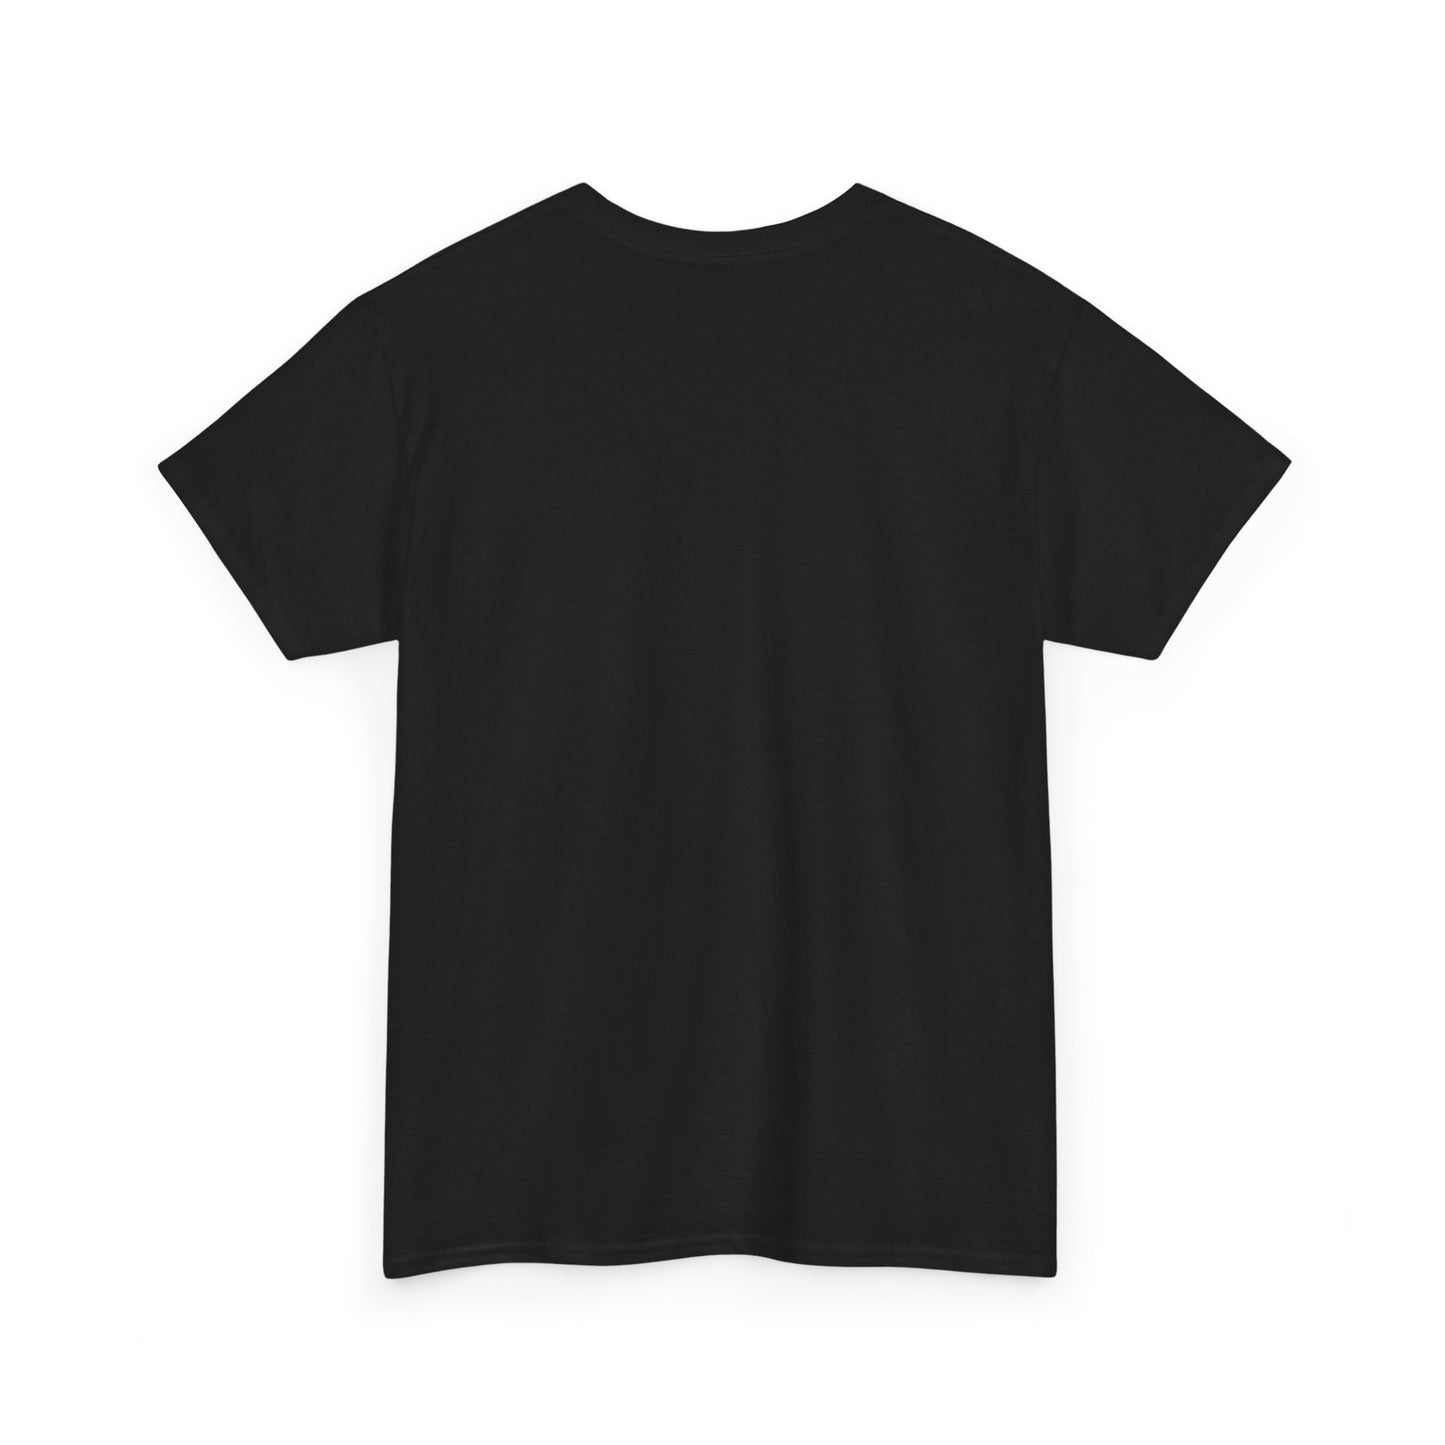 Caison Armstrong Heavy Cotton Tee